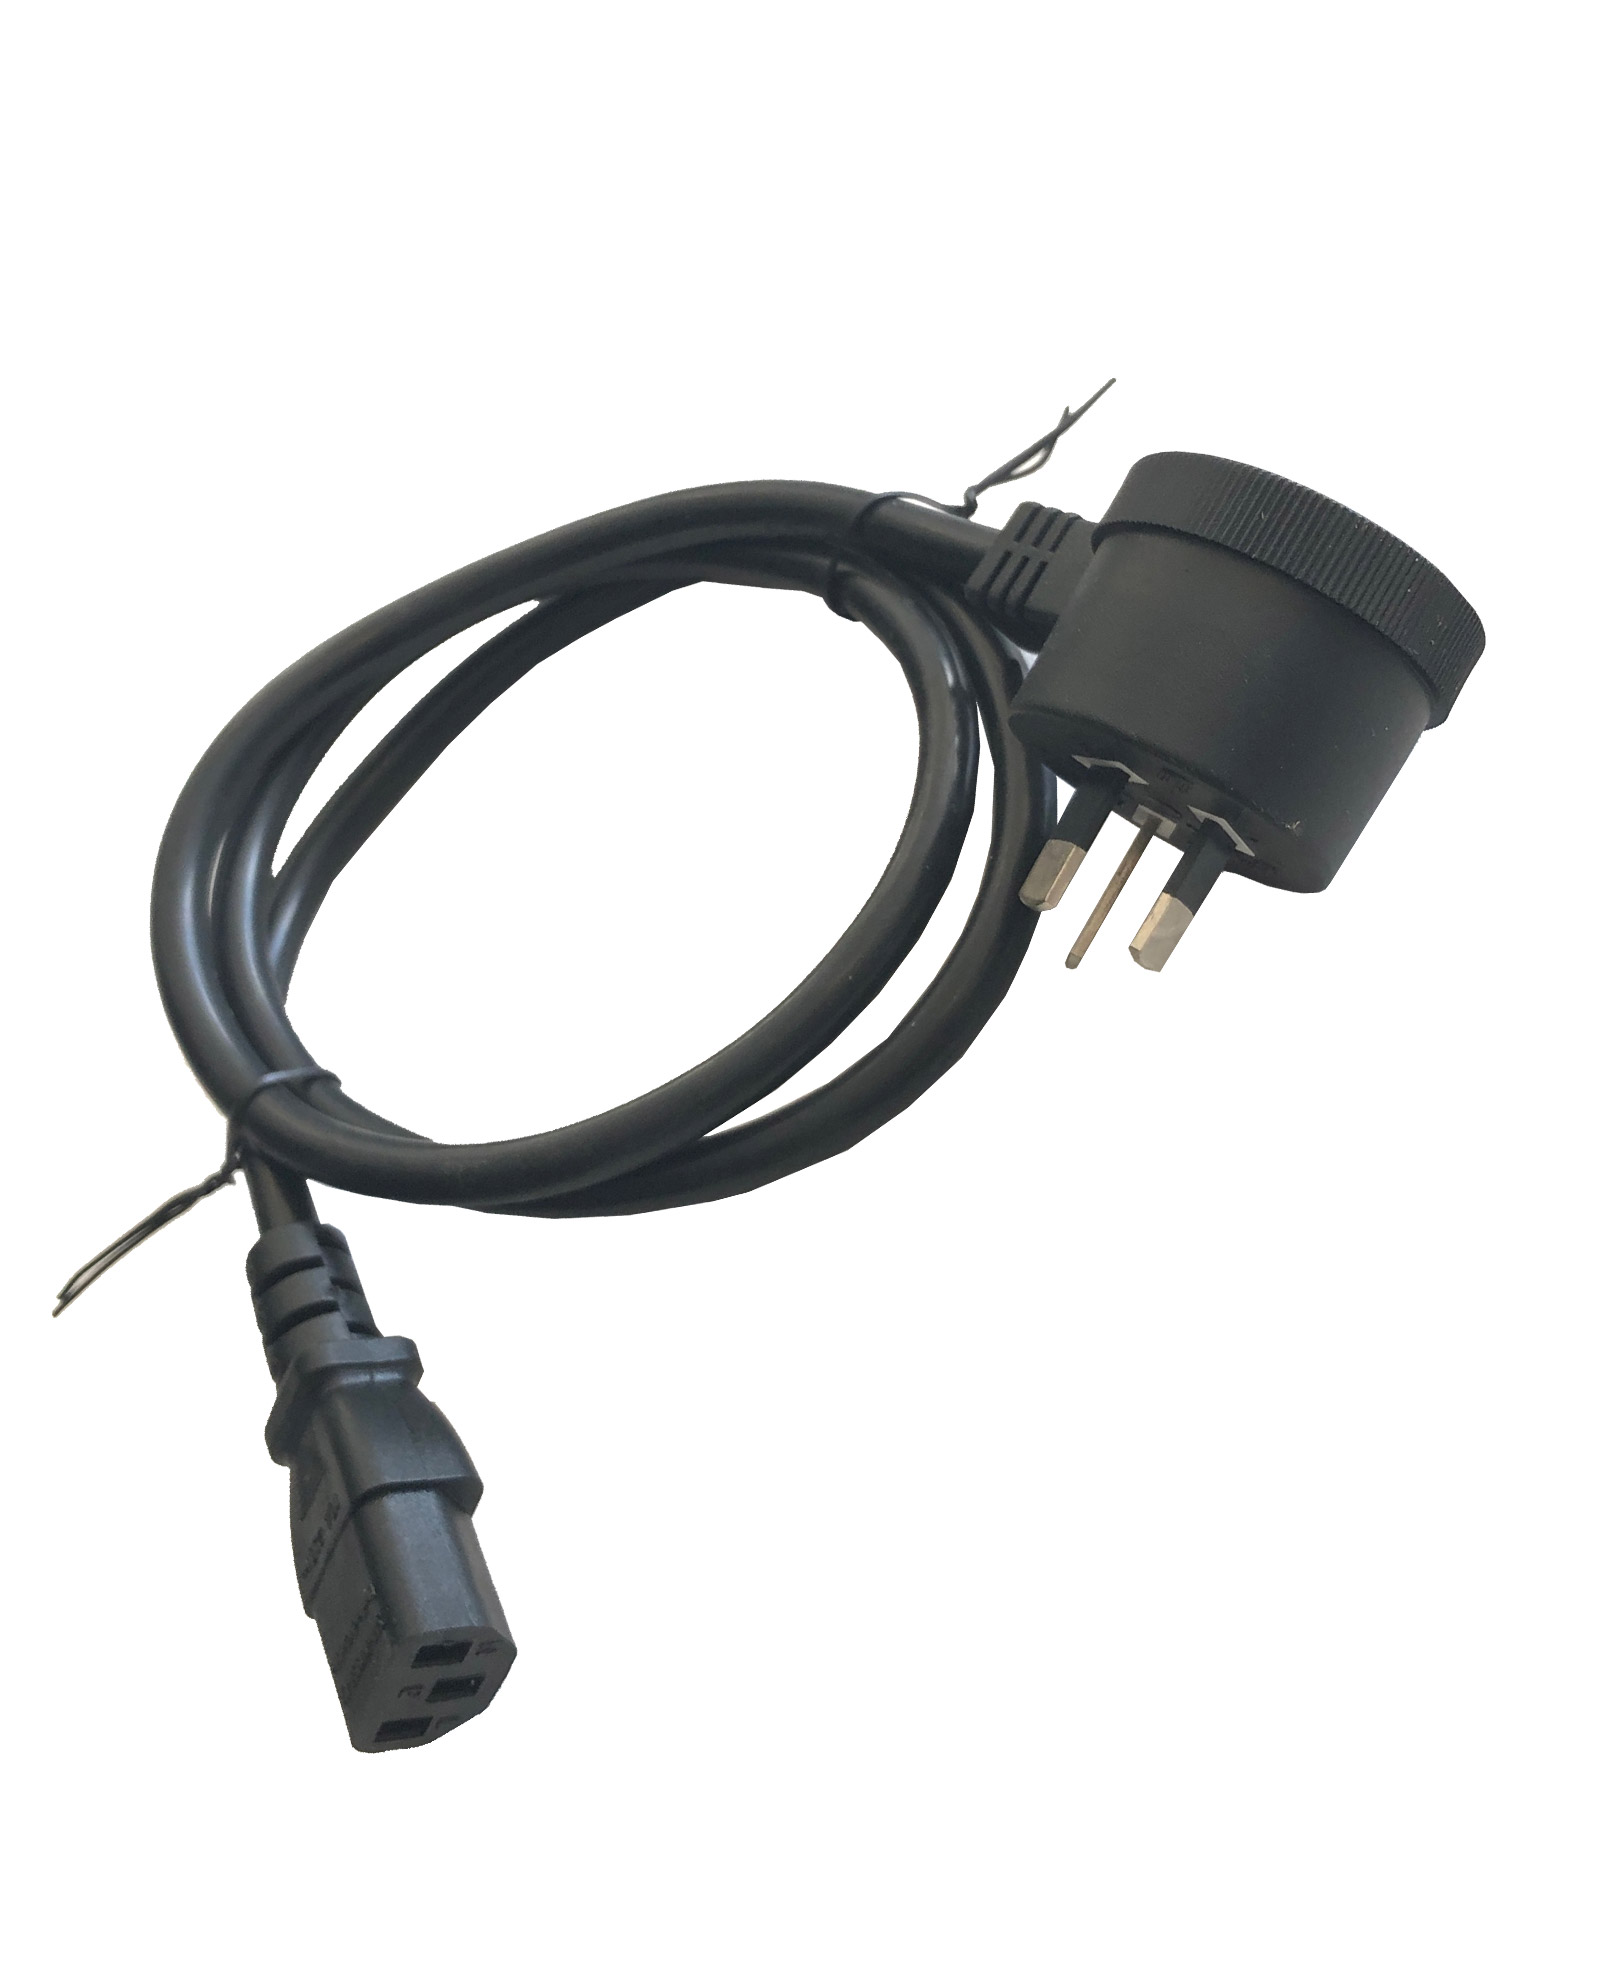 10A Tapon Plug to IEC Connector